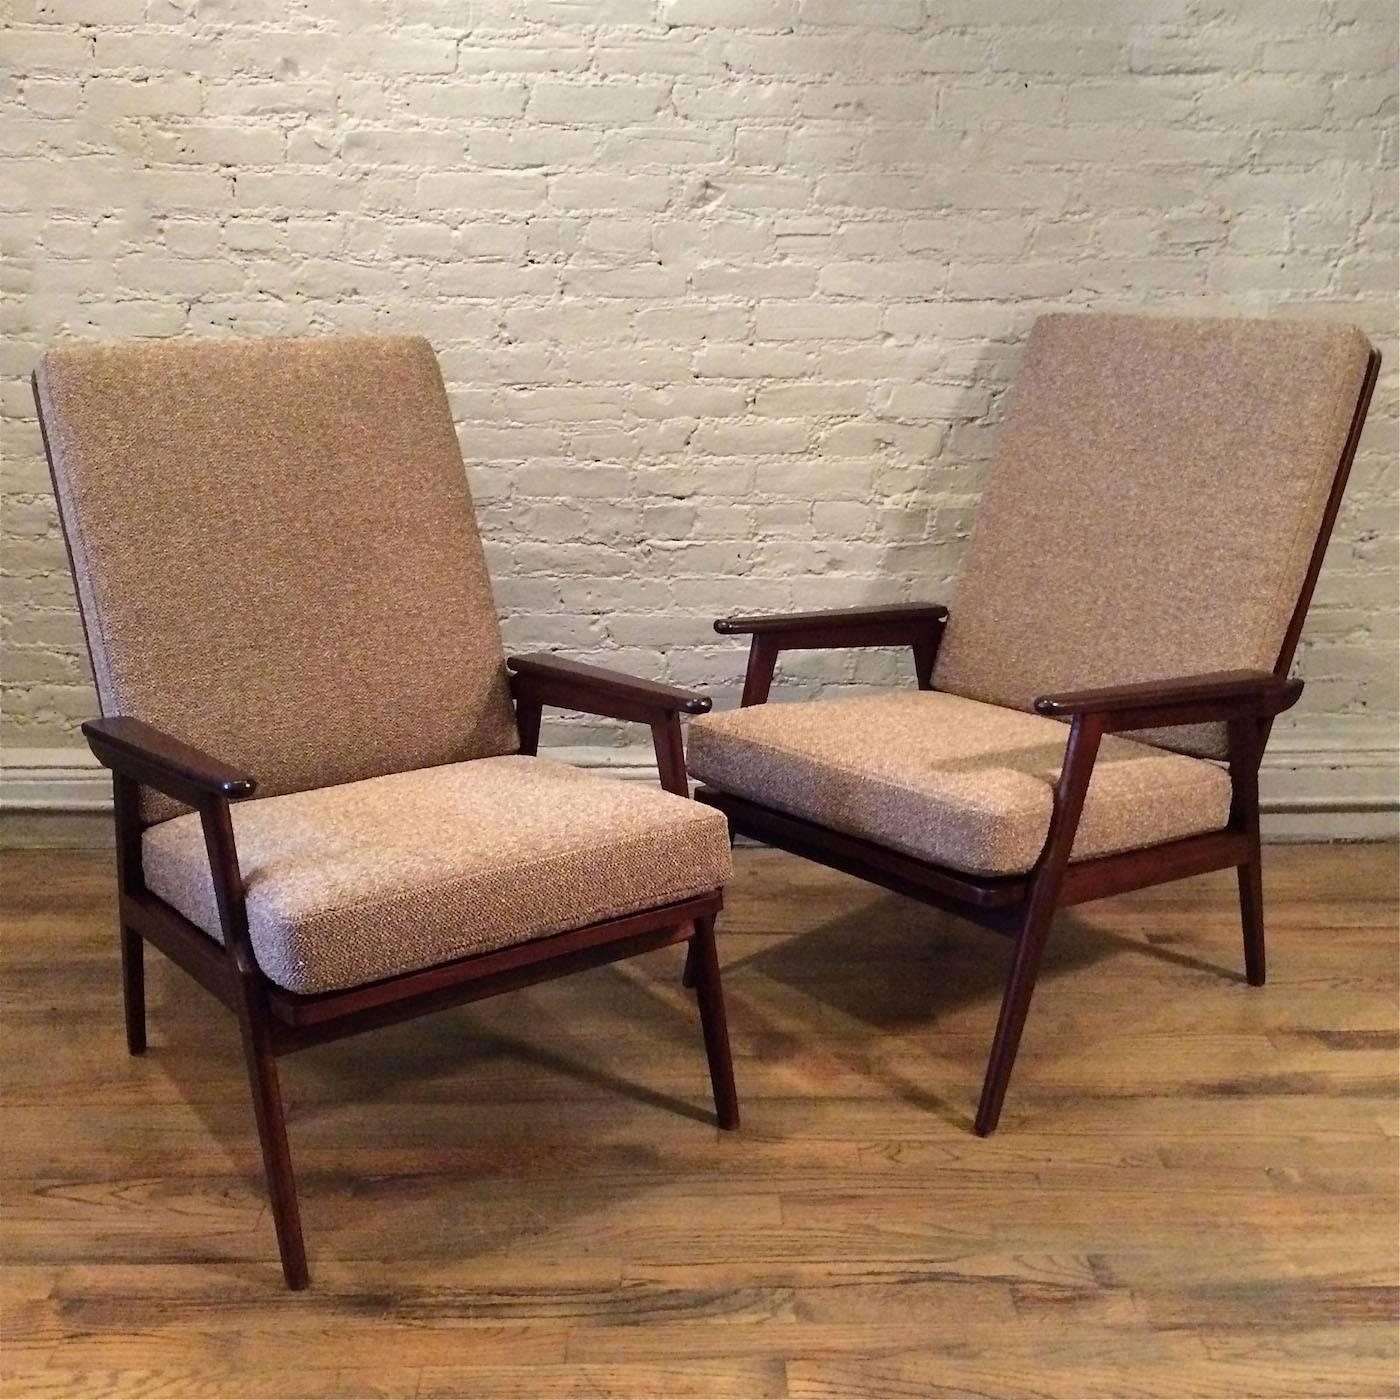 Pair of Mid-Century Modern, high back, stained beech, lounge chairs marked Made in Italy are newly upholstered in a nubby mocha tweed.